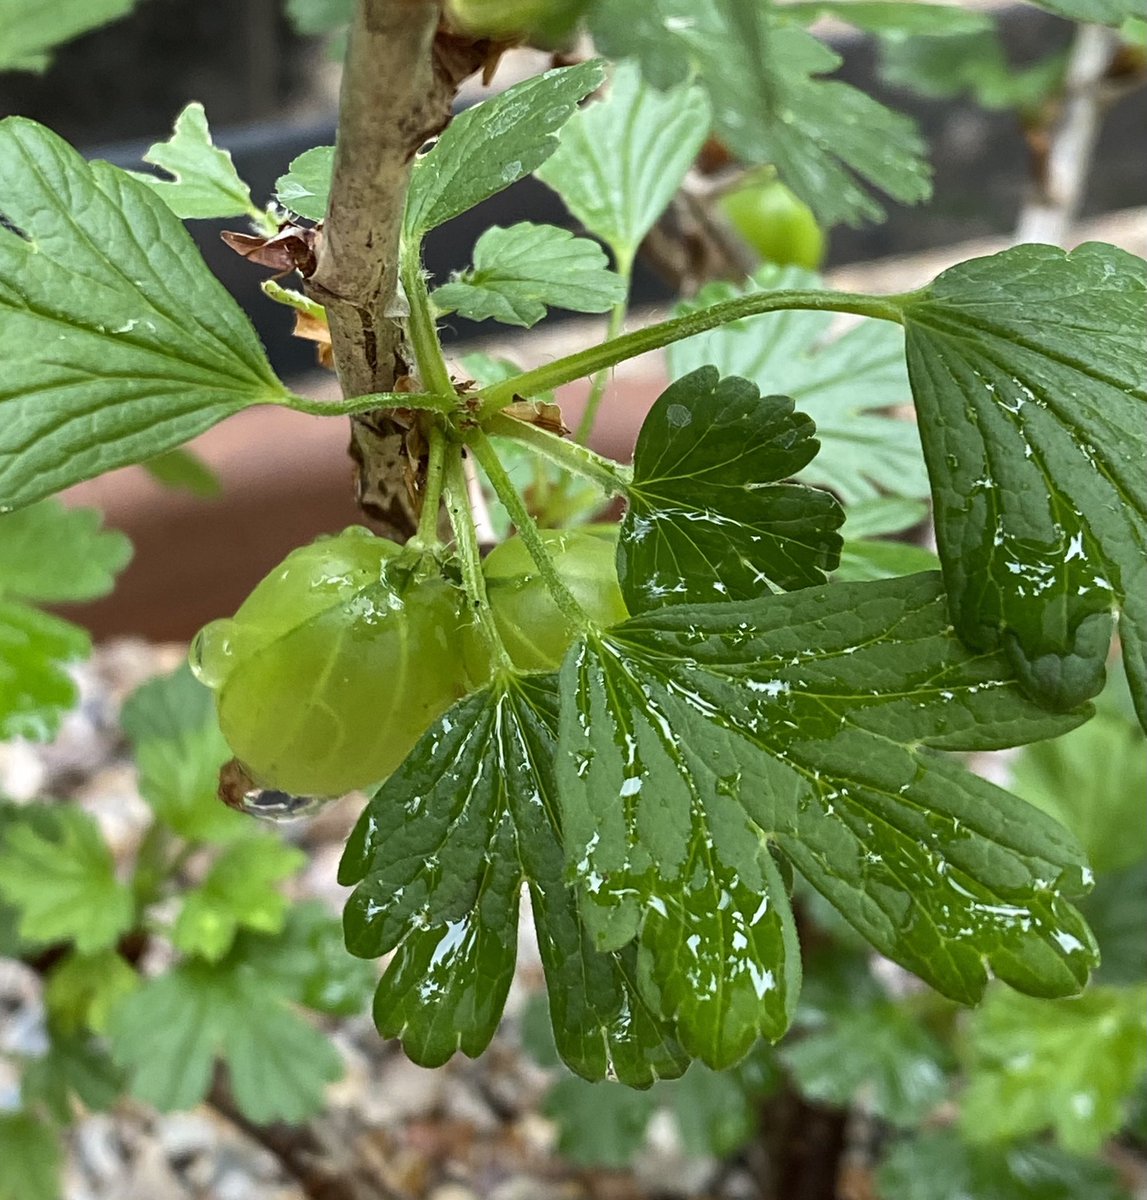 Firsts goosgogs have appeared! So excited for gooseberry fool -delicious #growwithgyo